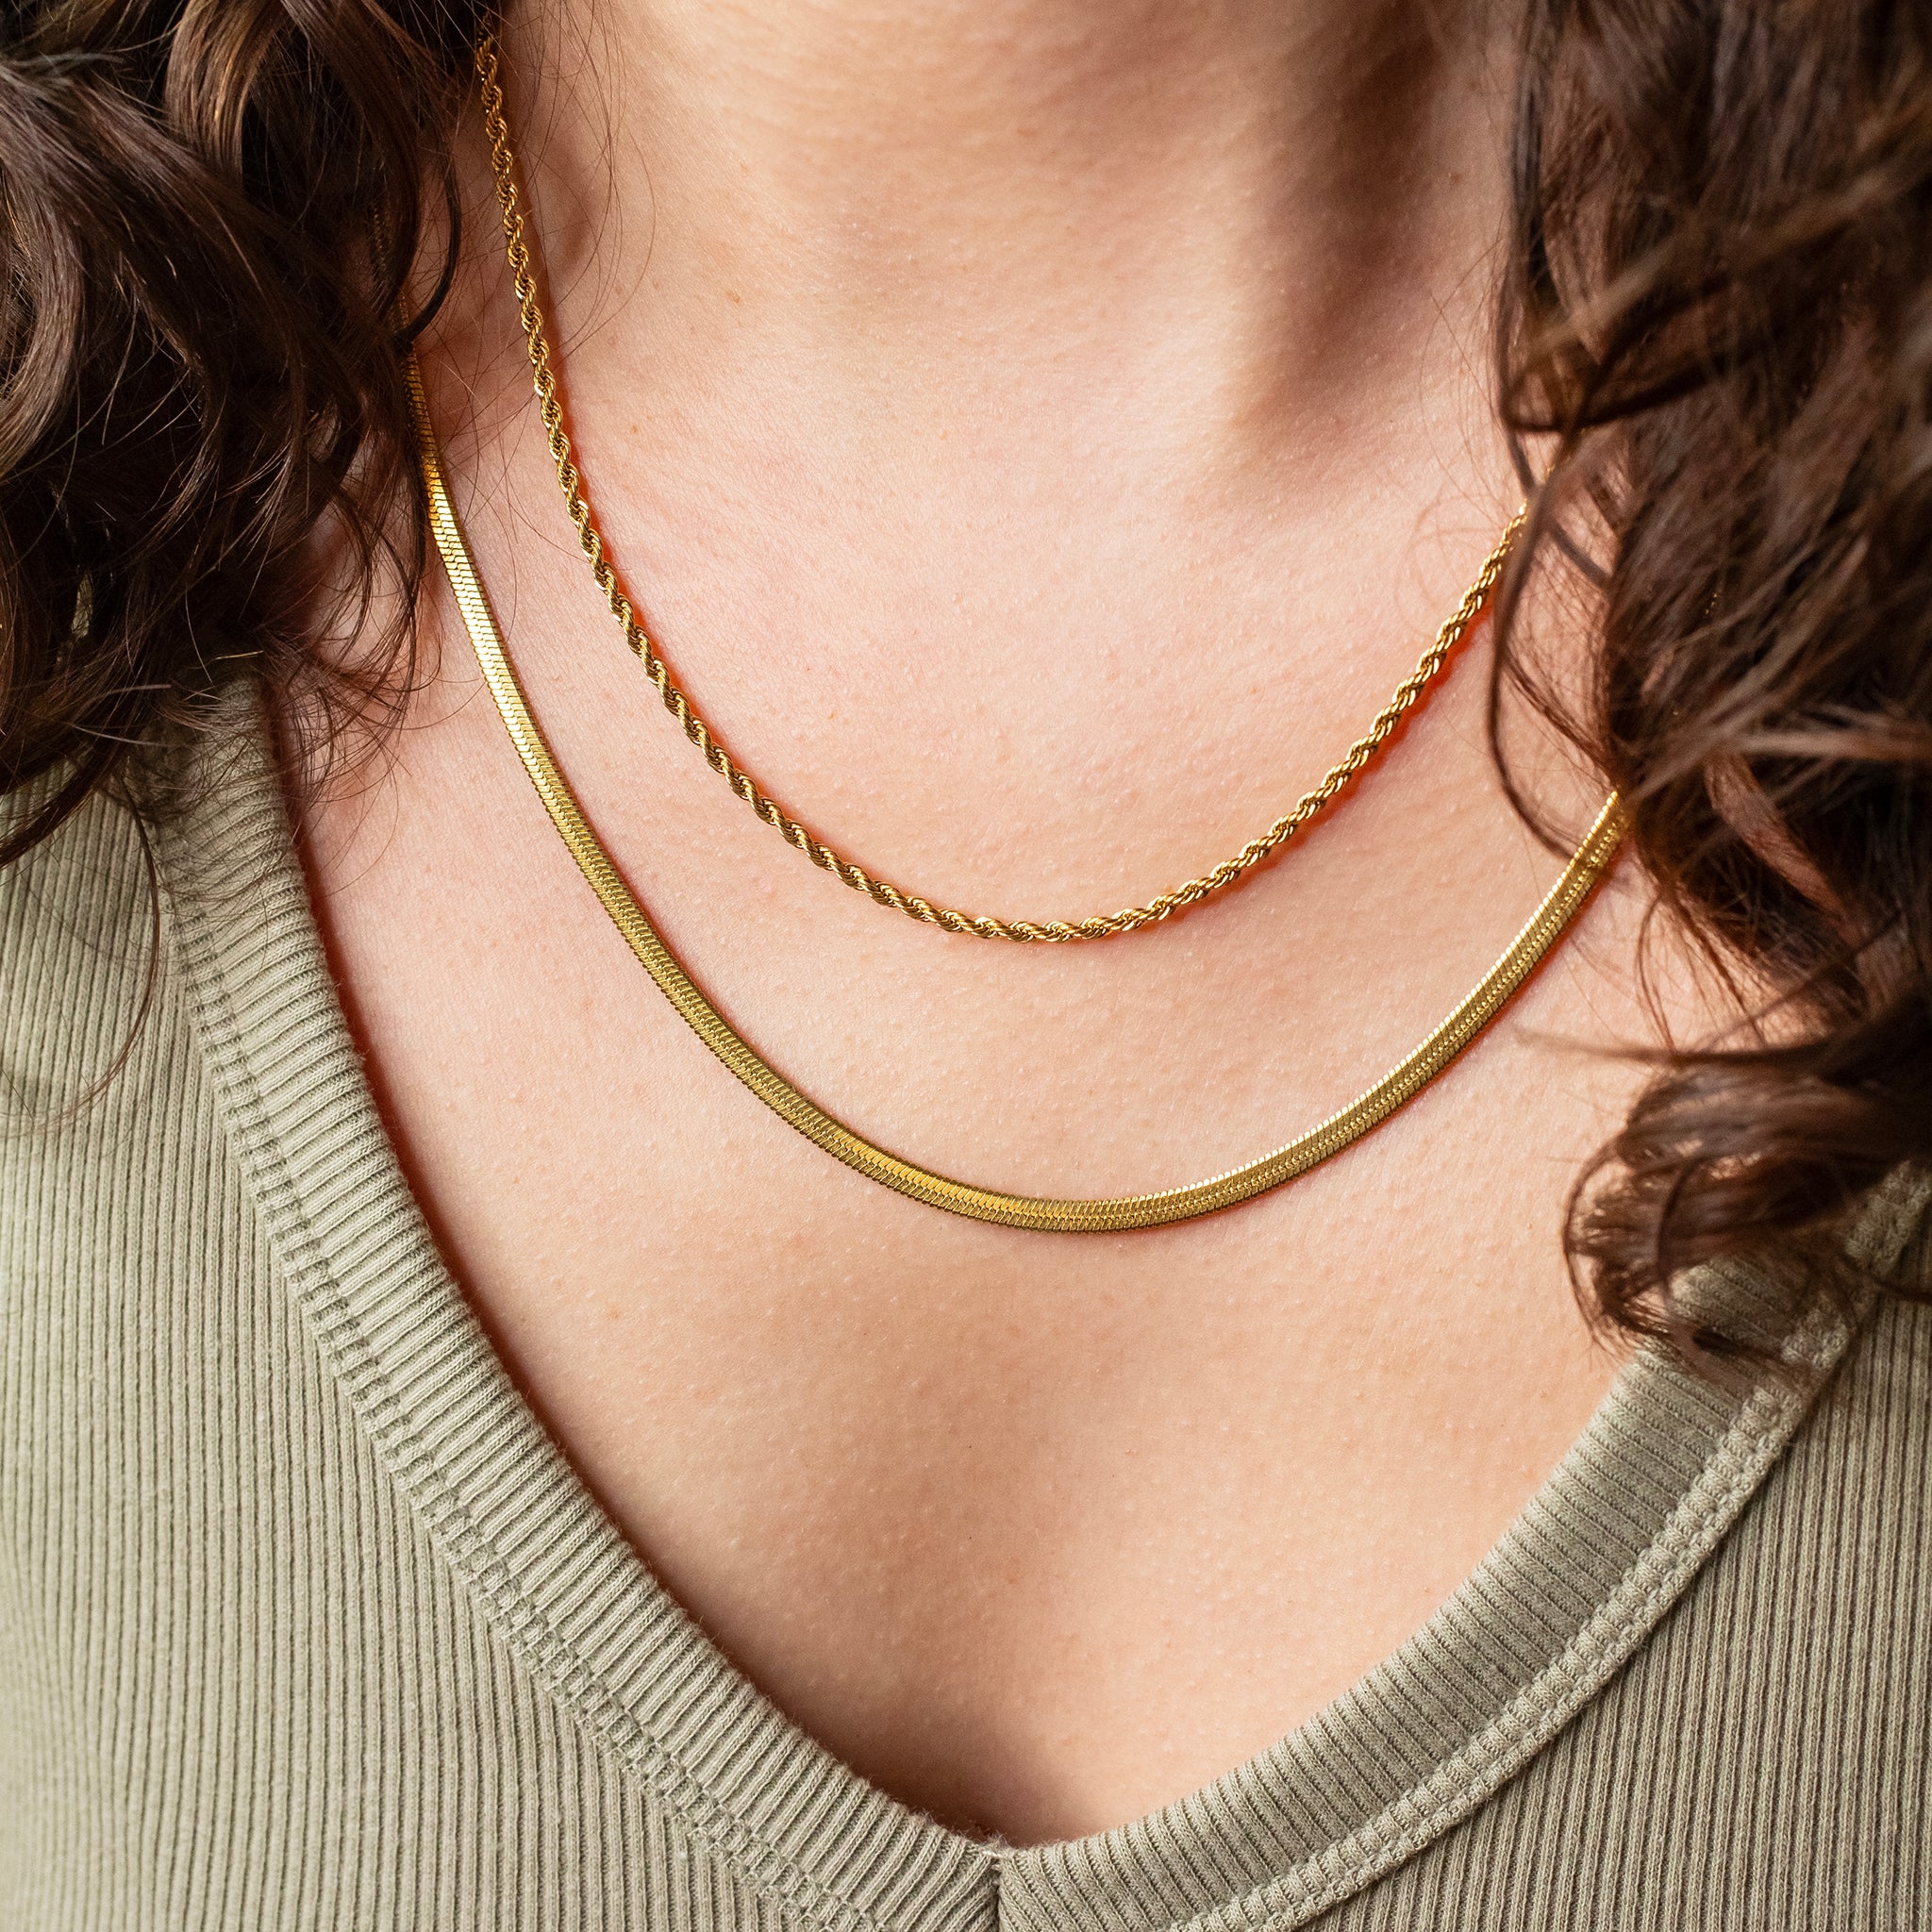 DSJ's Signature Meaningful Gold GIGI Necklace | Initial Necklace